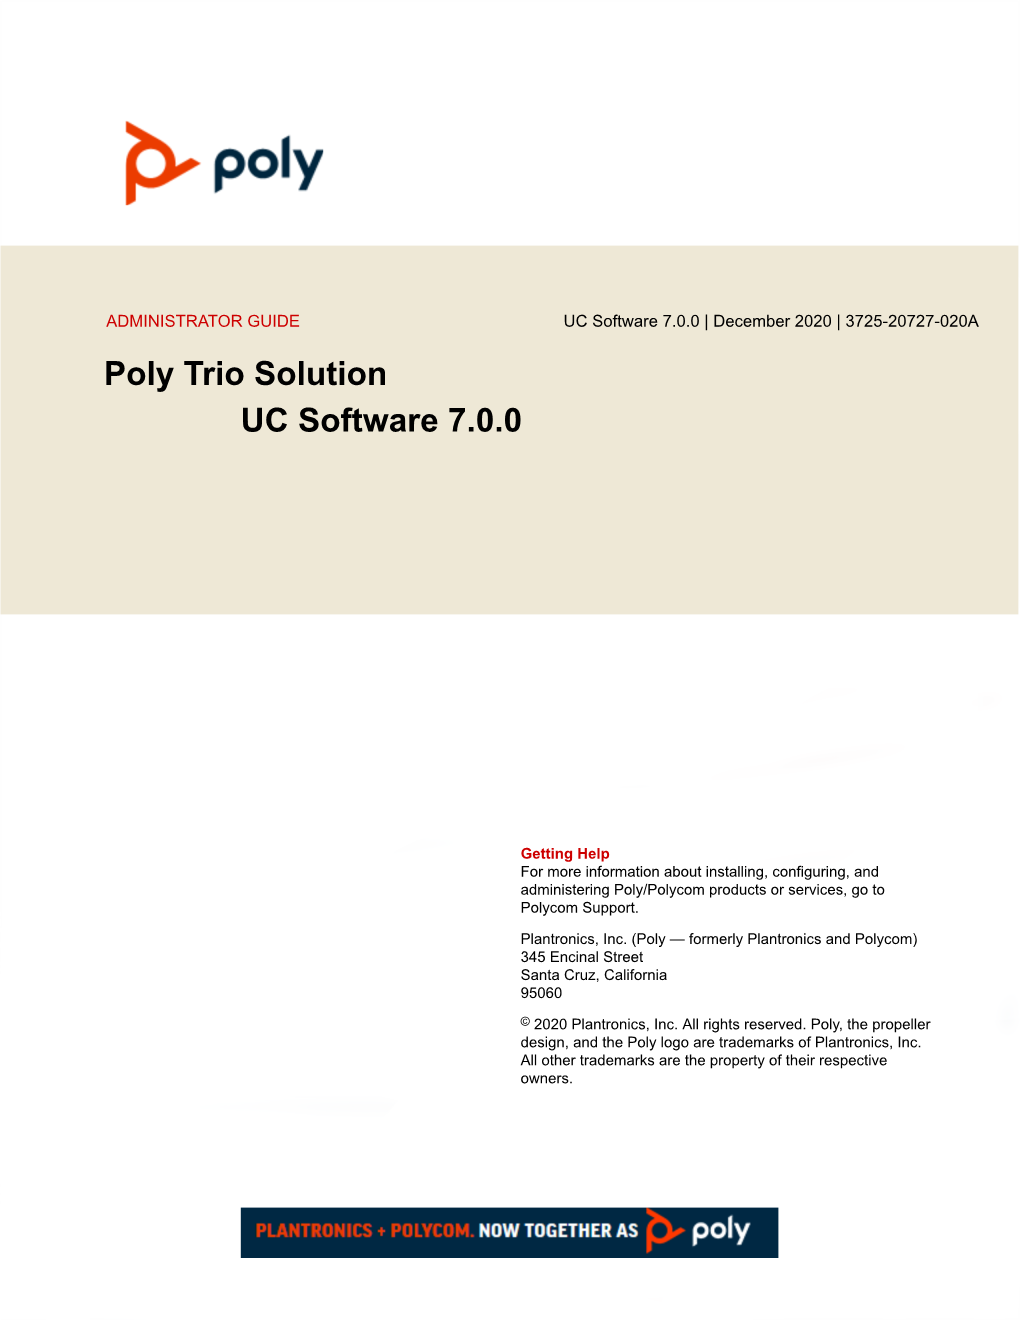 Poly Trio Solution Administrator Guide 7.0.0AA